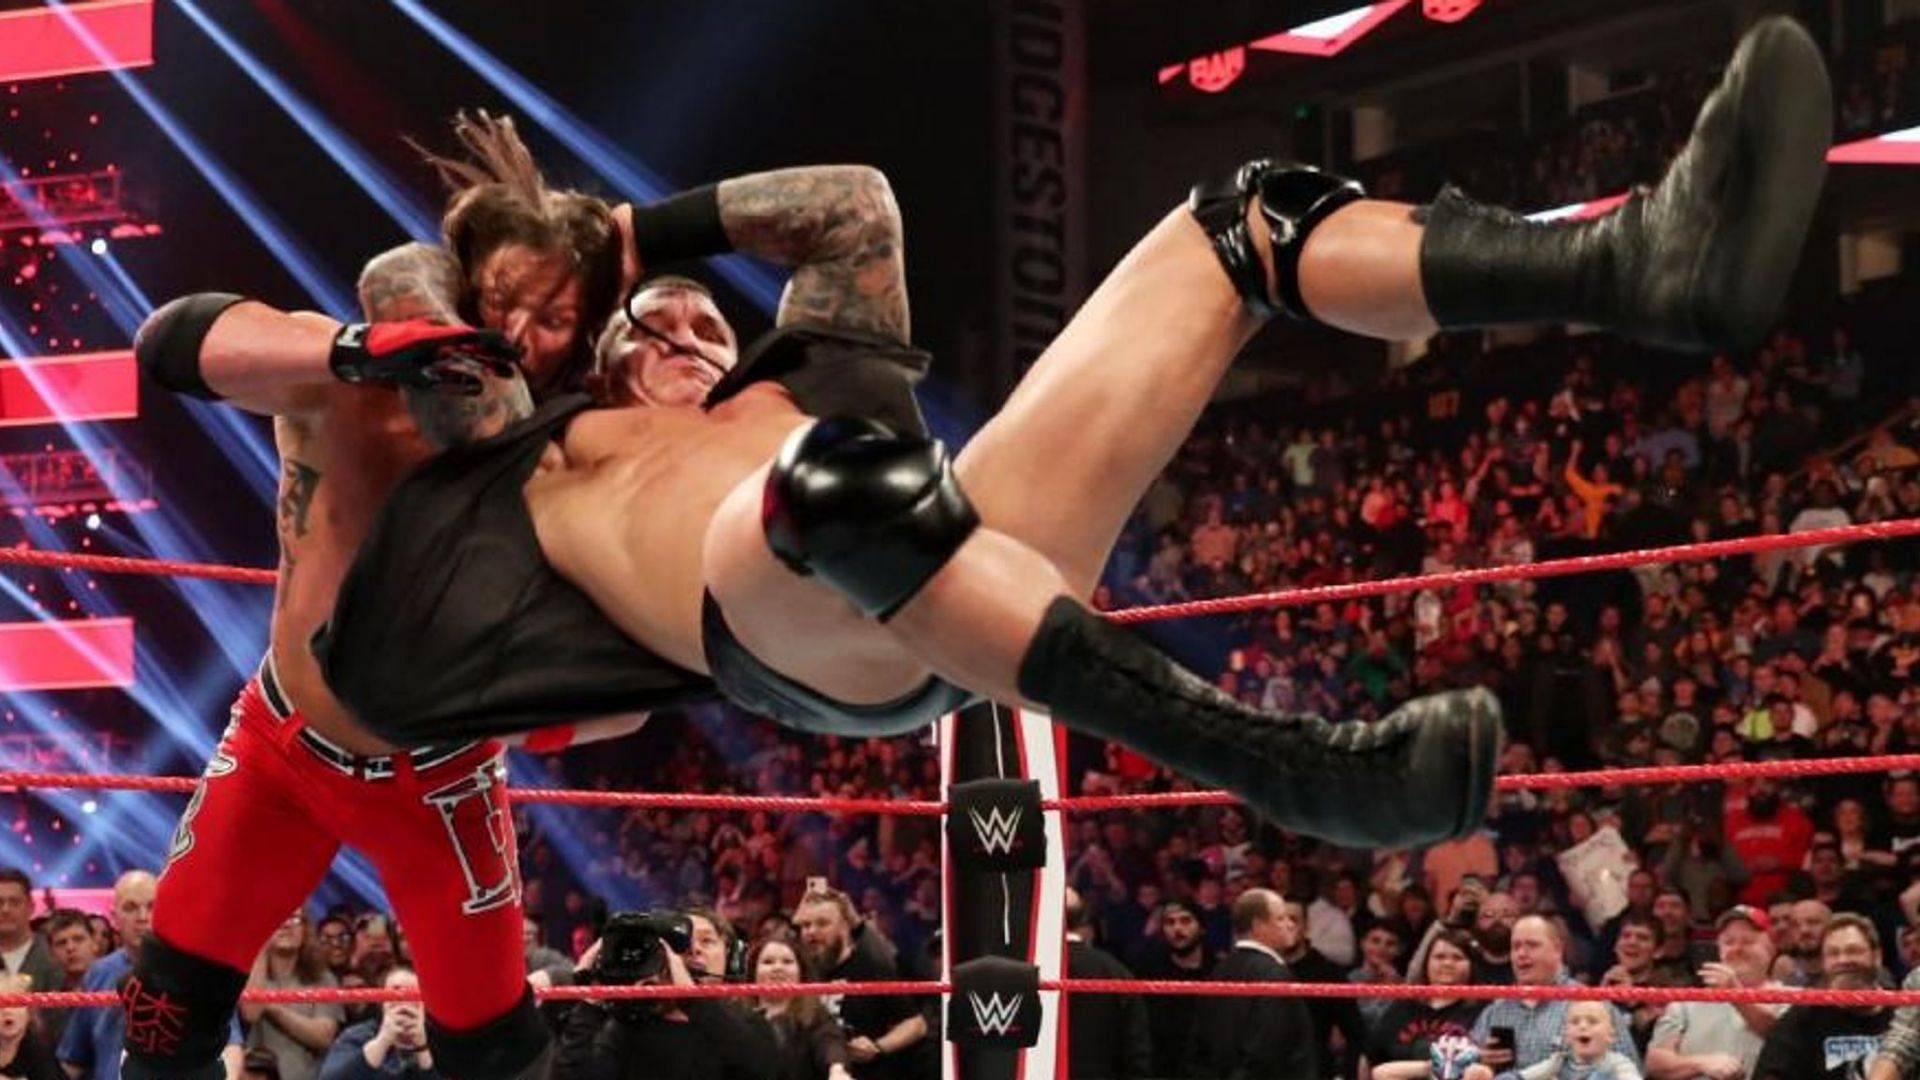 Randy Orton has countered moves such as The Stomp and Shooting Star Press with his RKO.